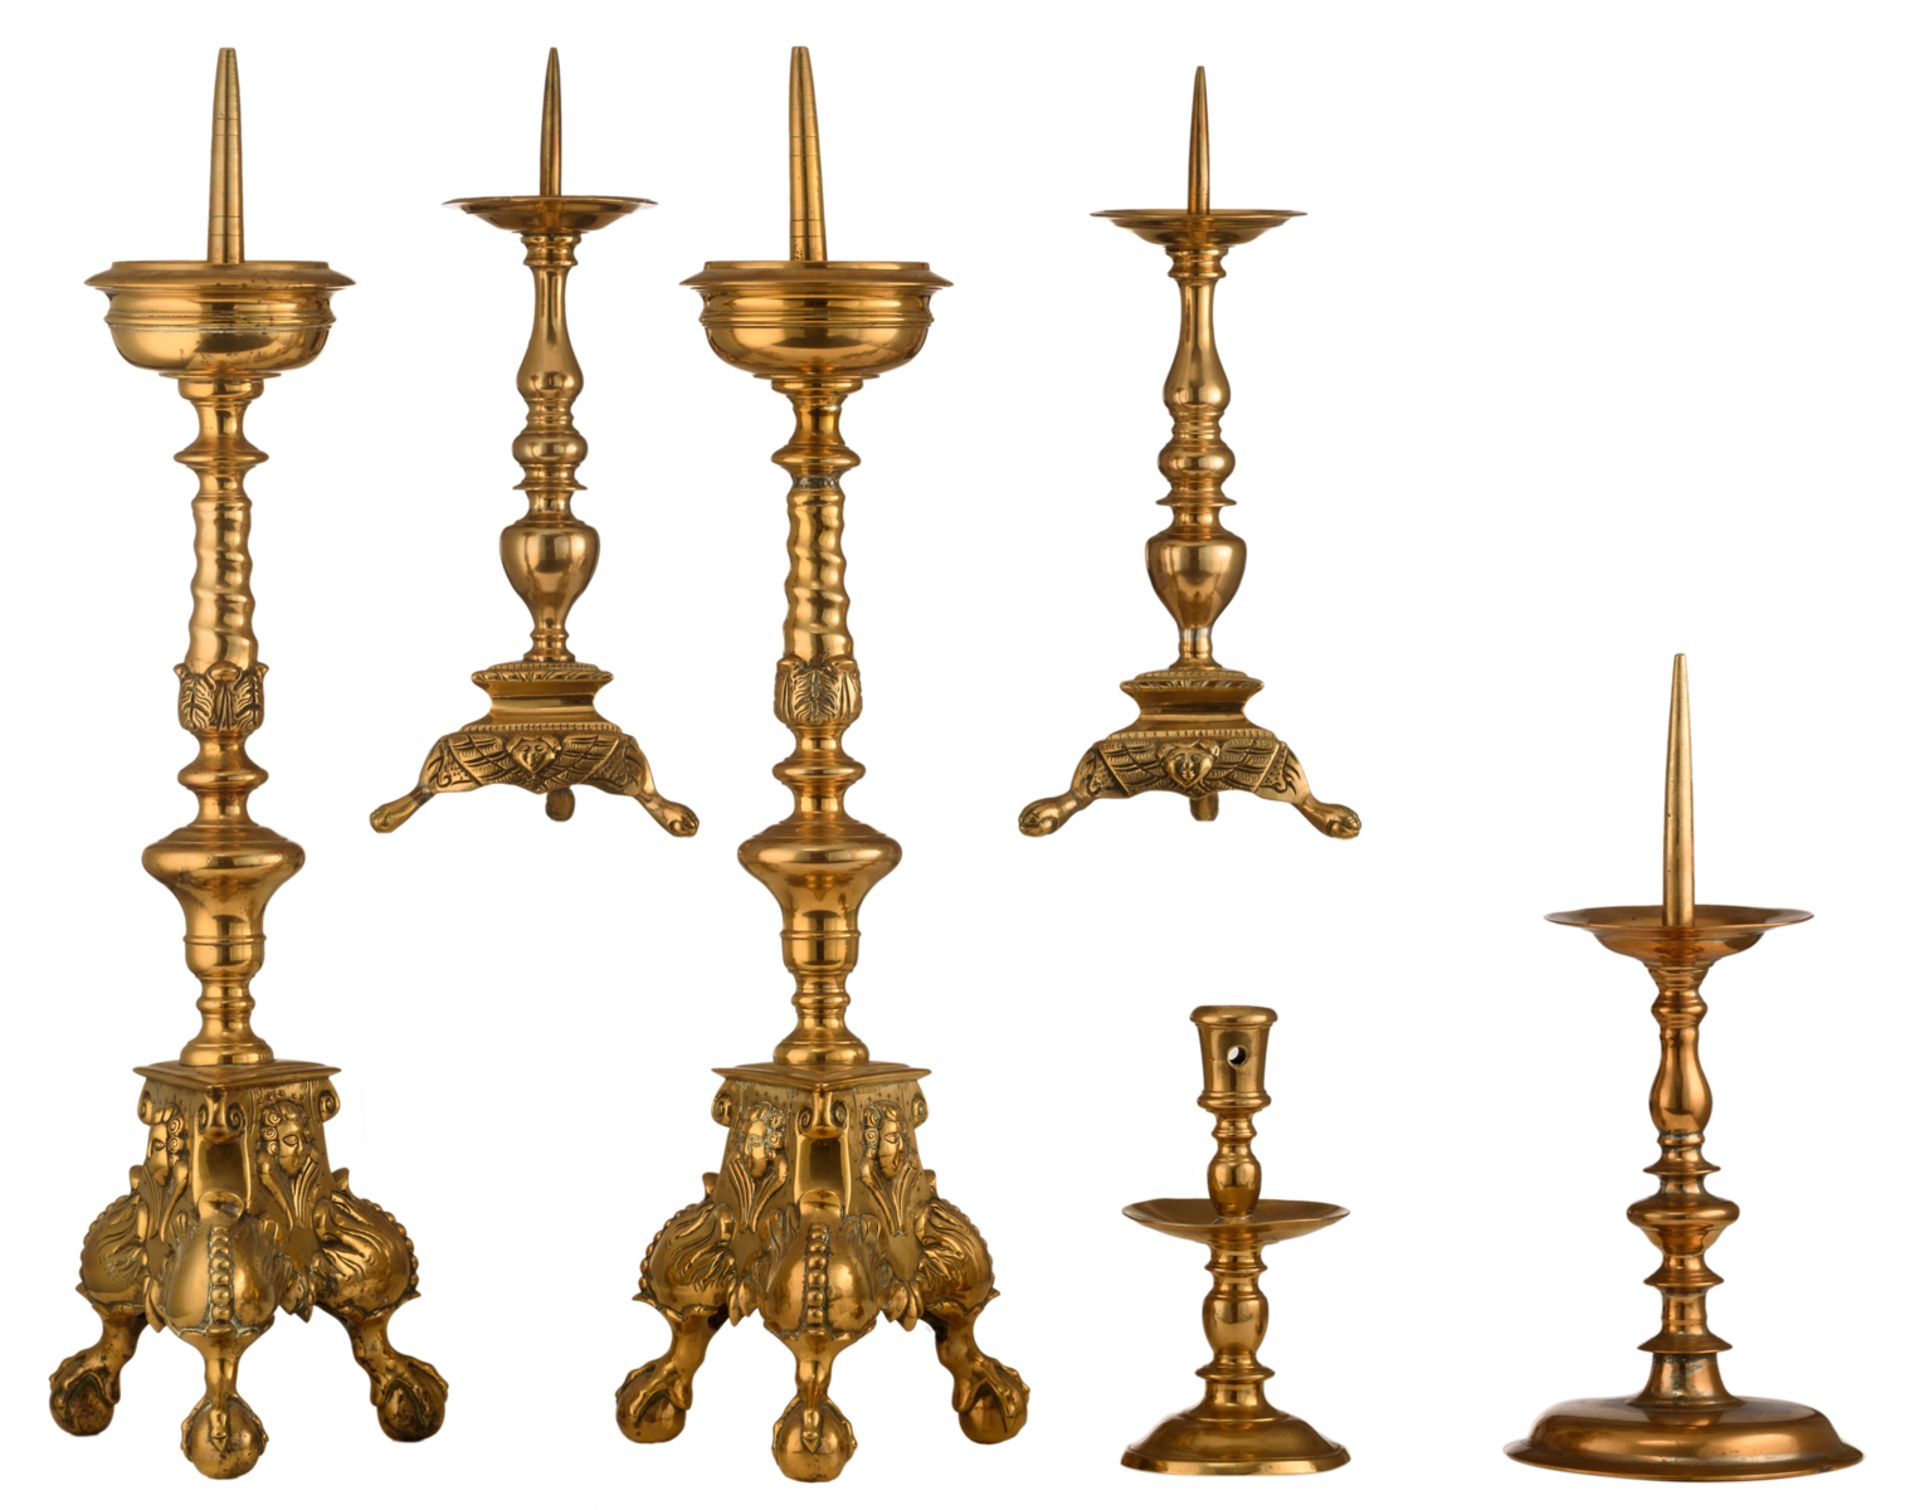 A set of a bronze pricket candlestick and a Heemskerck type candlestick, 17th/18thC, H 19 - 33 cm;